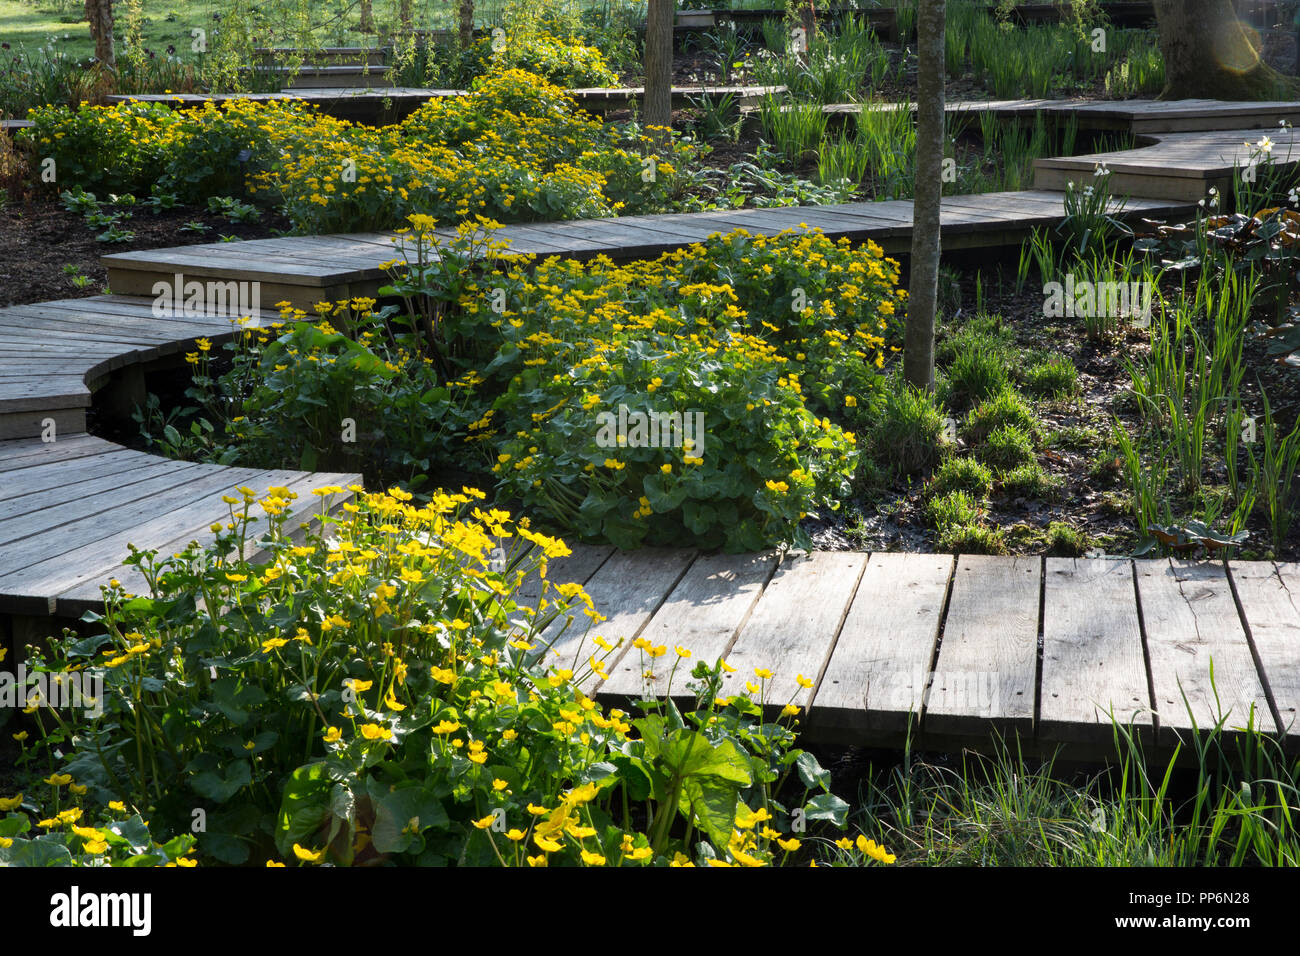 Plants with yellow blossoms growing around curved wooden boardwalk in a garden. Stock Photo